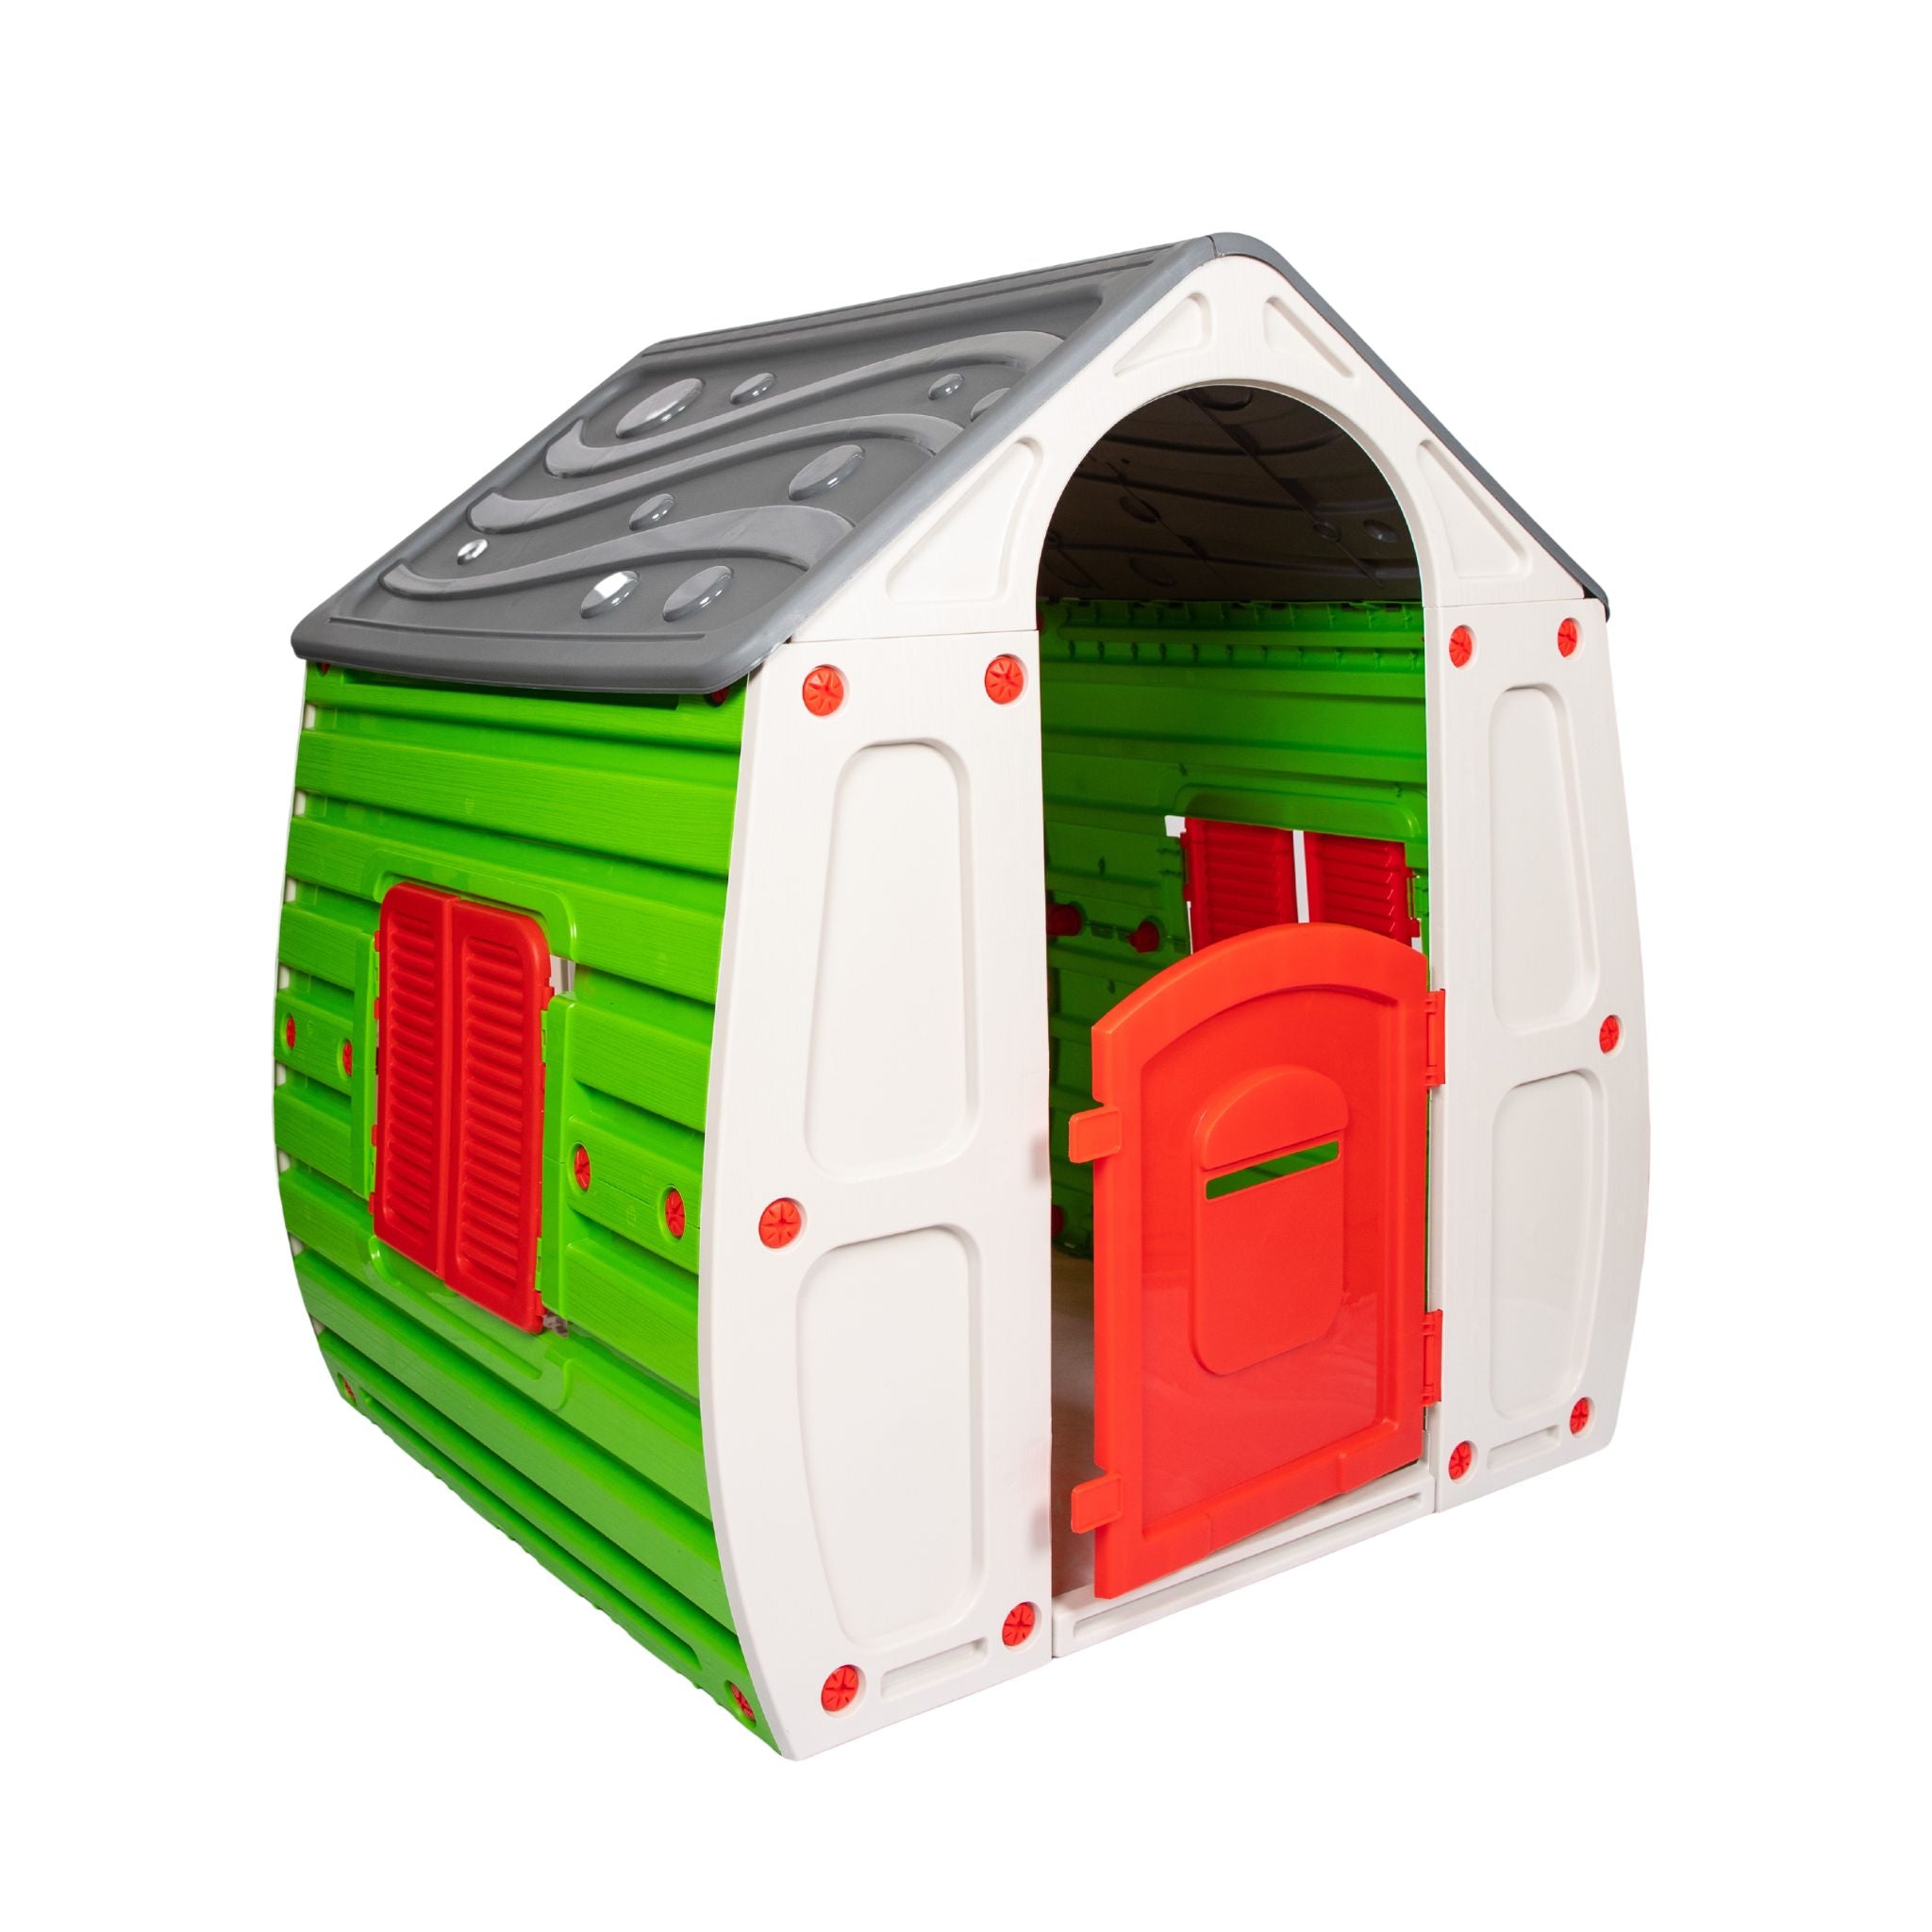 1.09m Grey & Green Kids Indoor Outdoor Plastic Wendy House Magical Playhouse